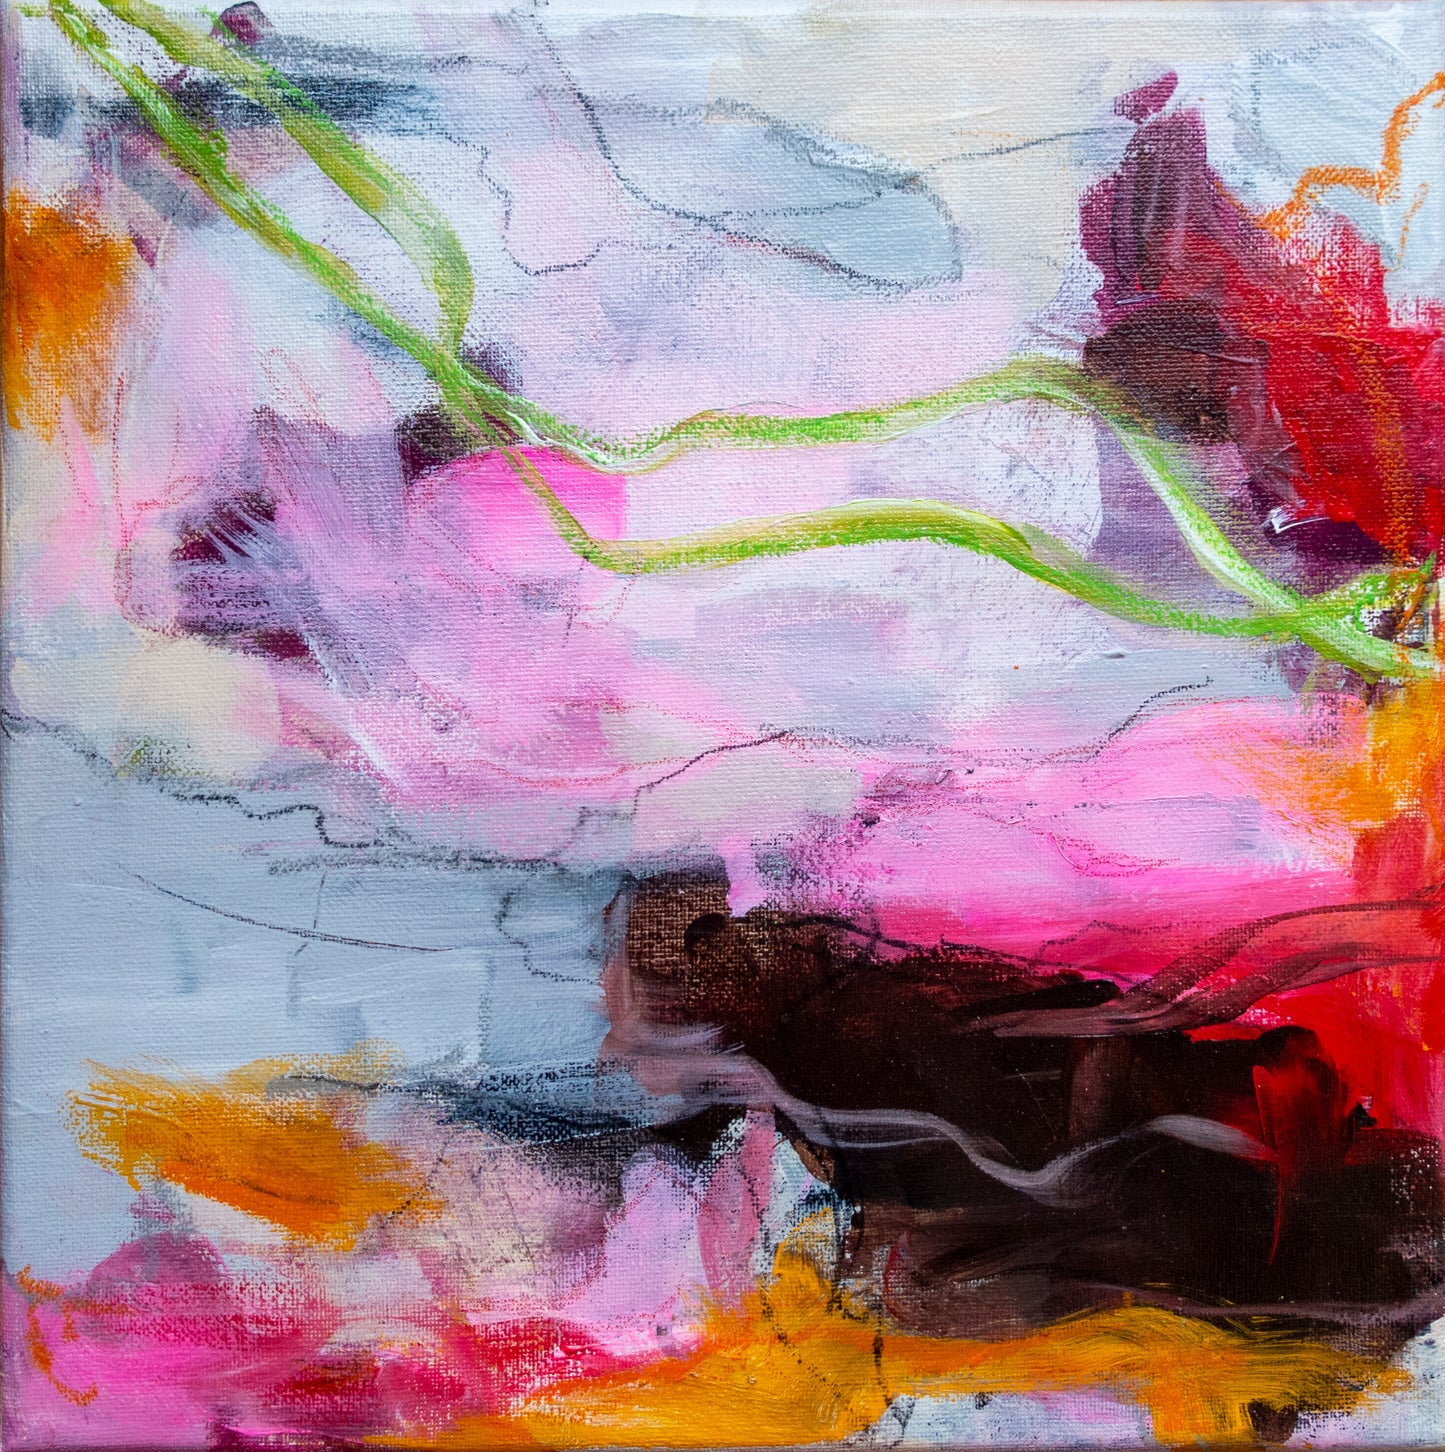 Colorful abstract painting using acrylic paint titled 'Maia' by artist Steffi Möllers; measures 12"x12"